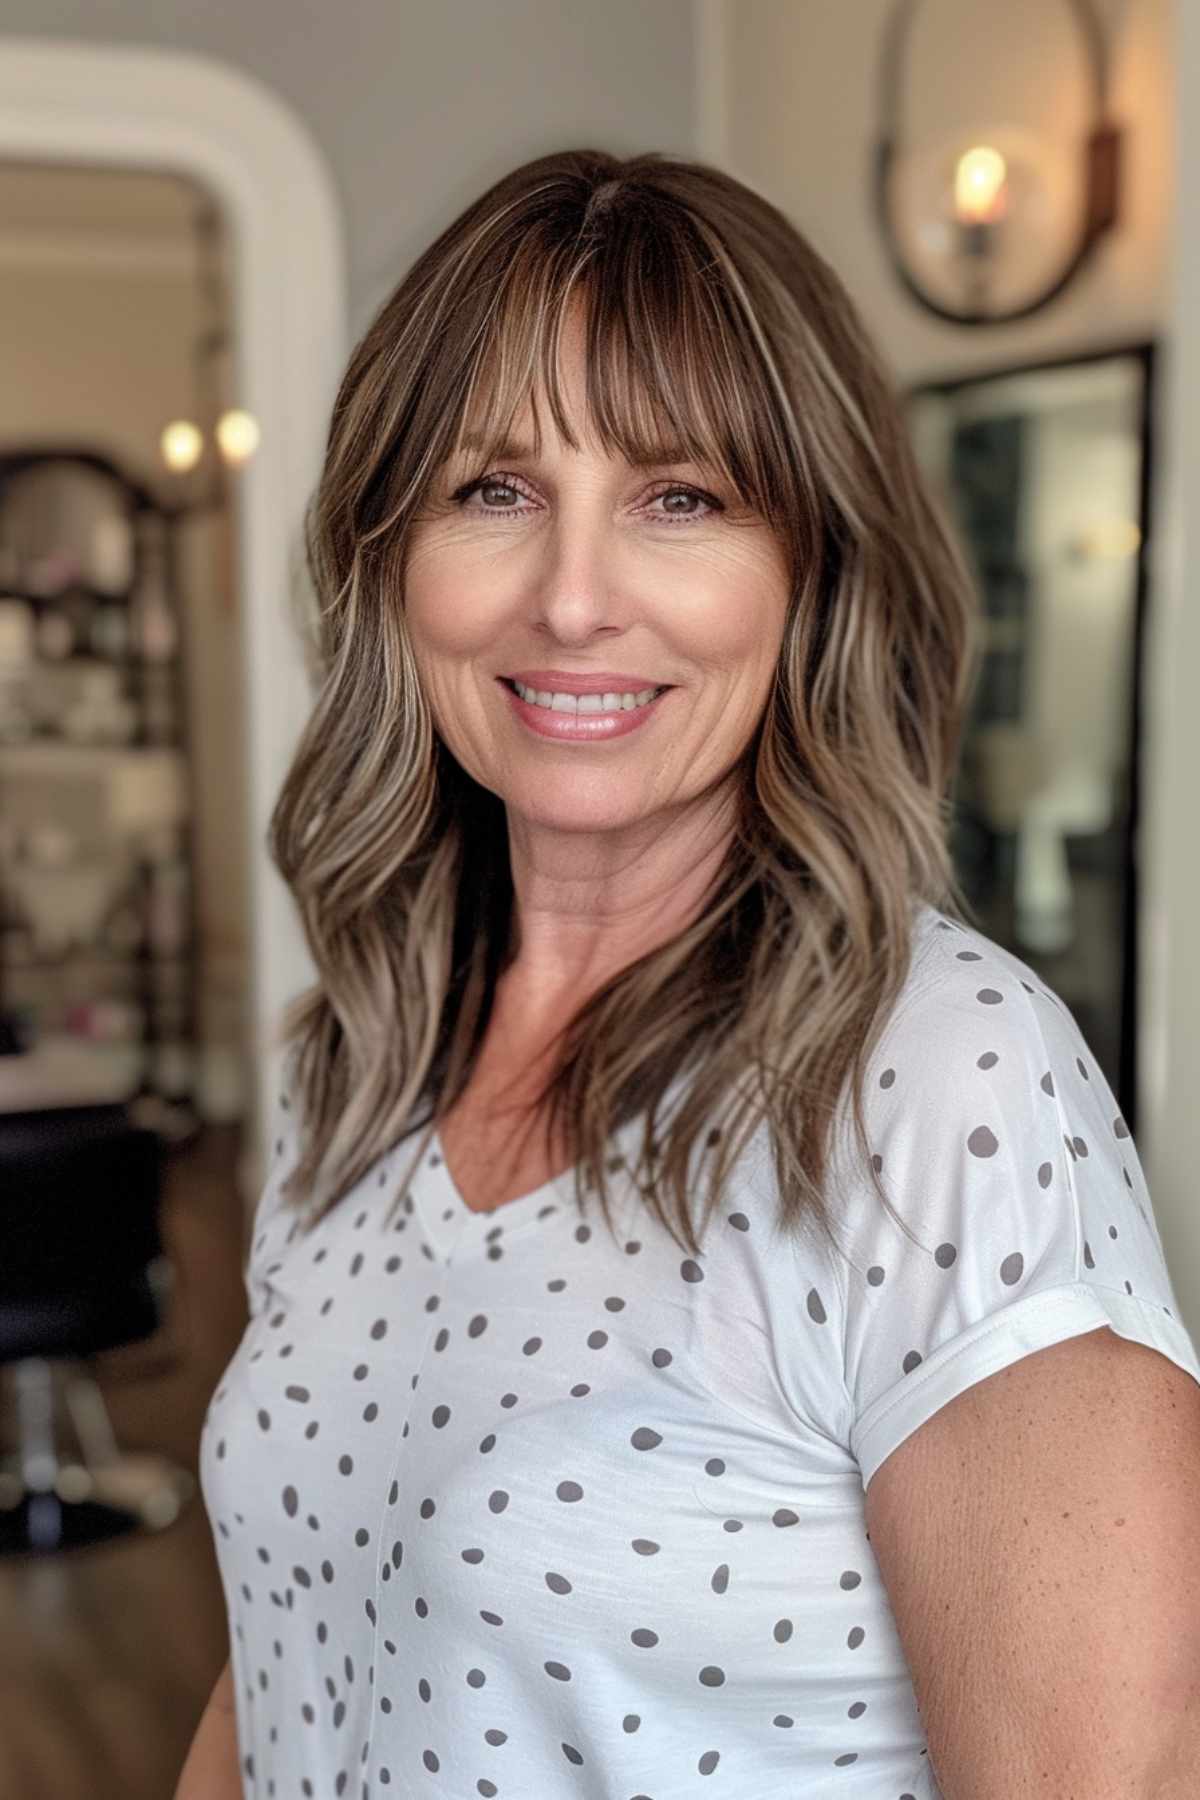 Medium-length wavy hairstyle with bangs for moms